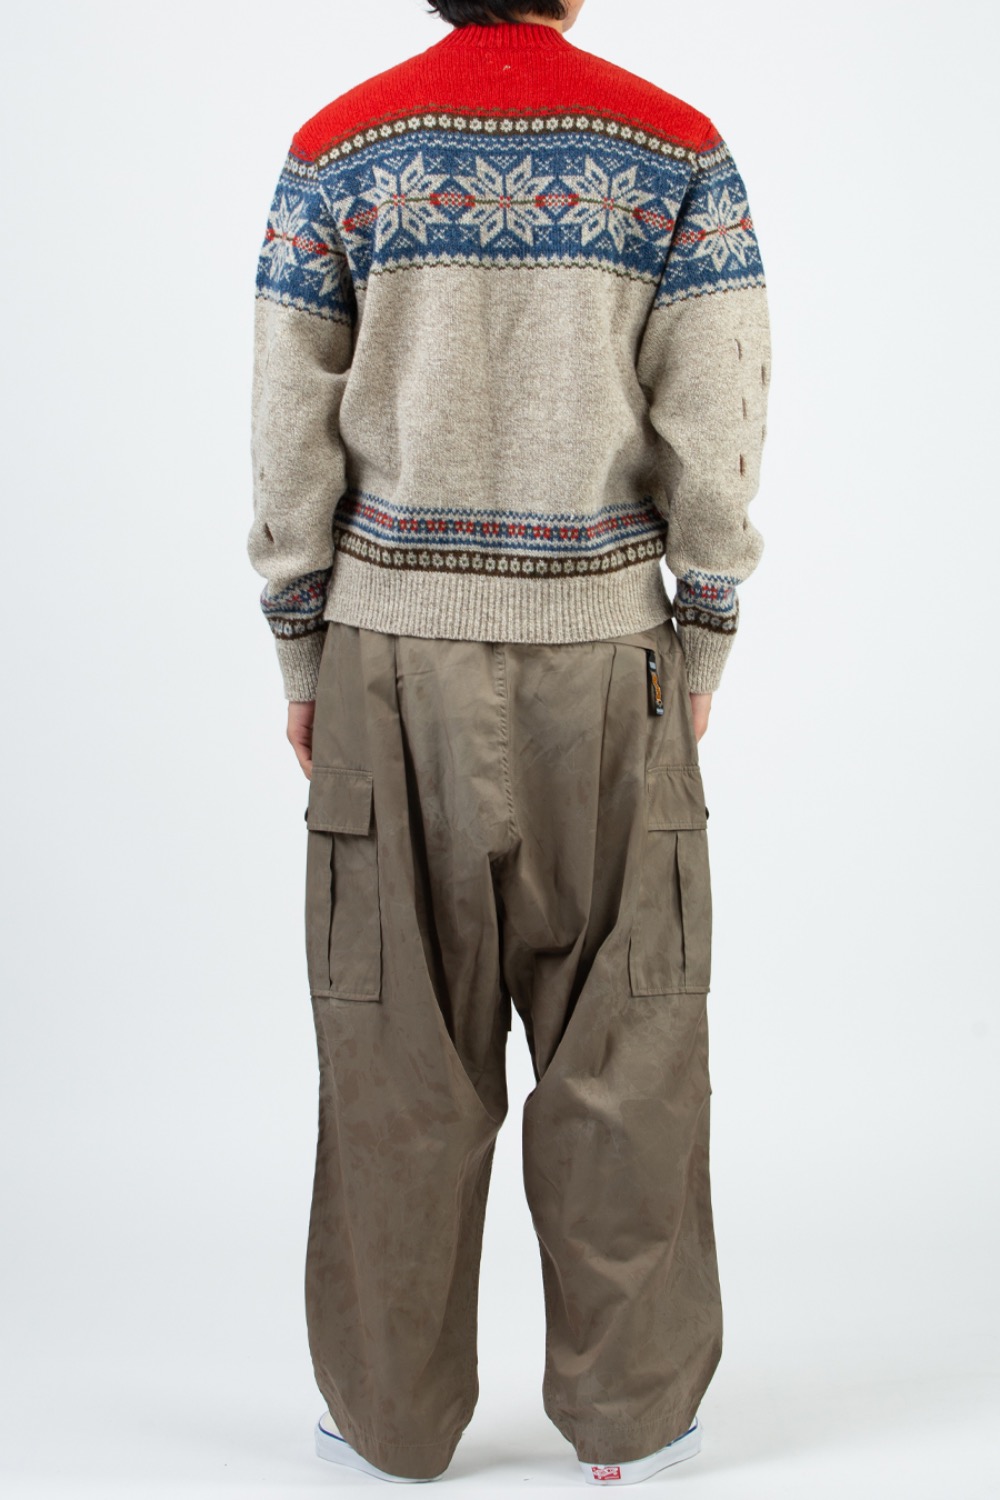 5G WOOL SNOW HOLE PANCHED SWEATER BEIGE